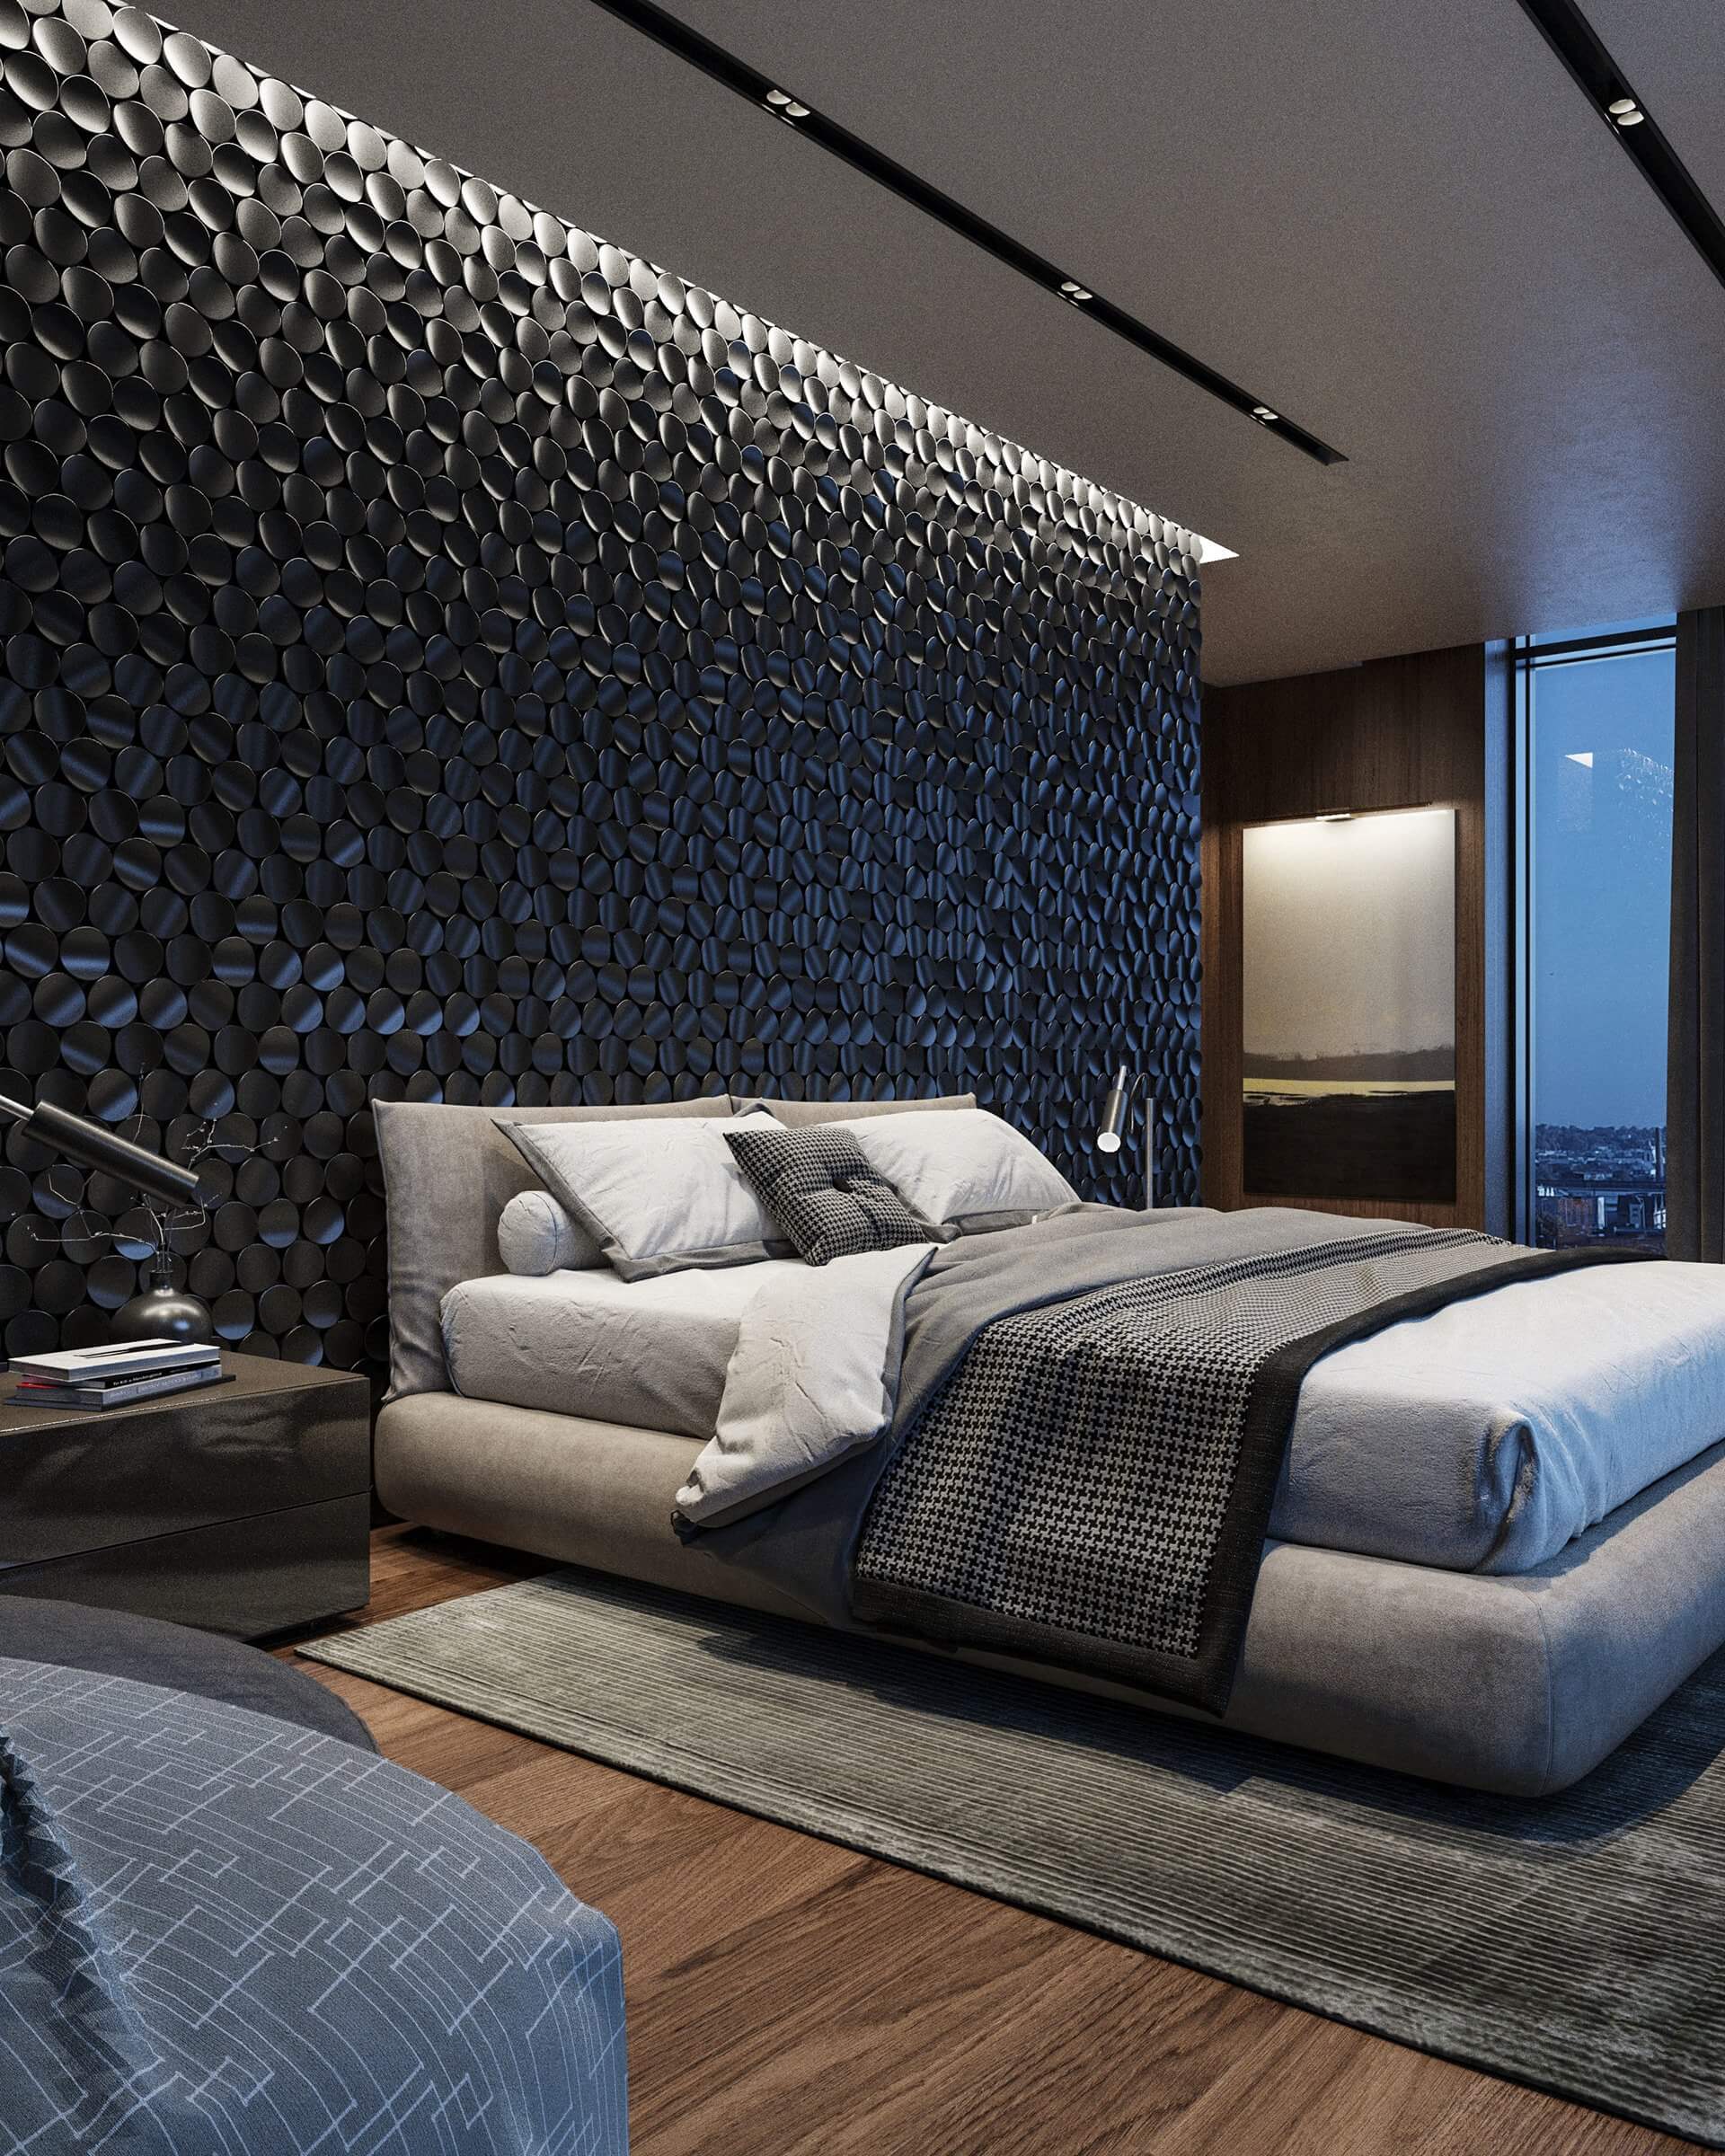 Interior Apartment project Pluses bedroom black wall pattern design lights - cgi visualization